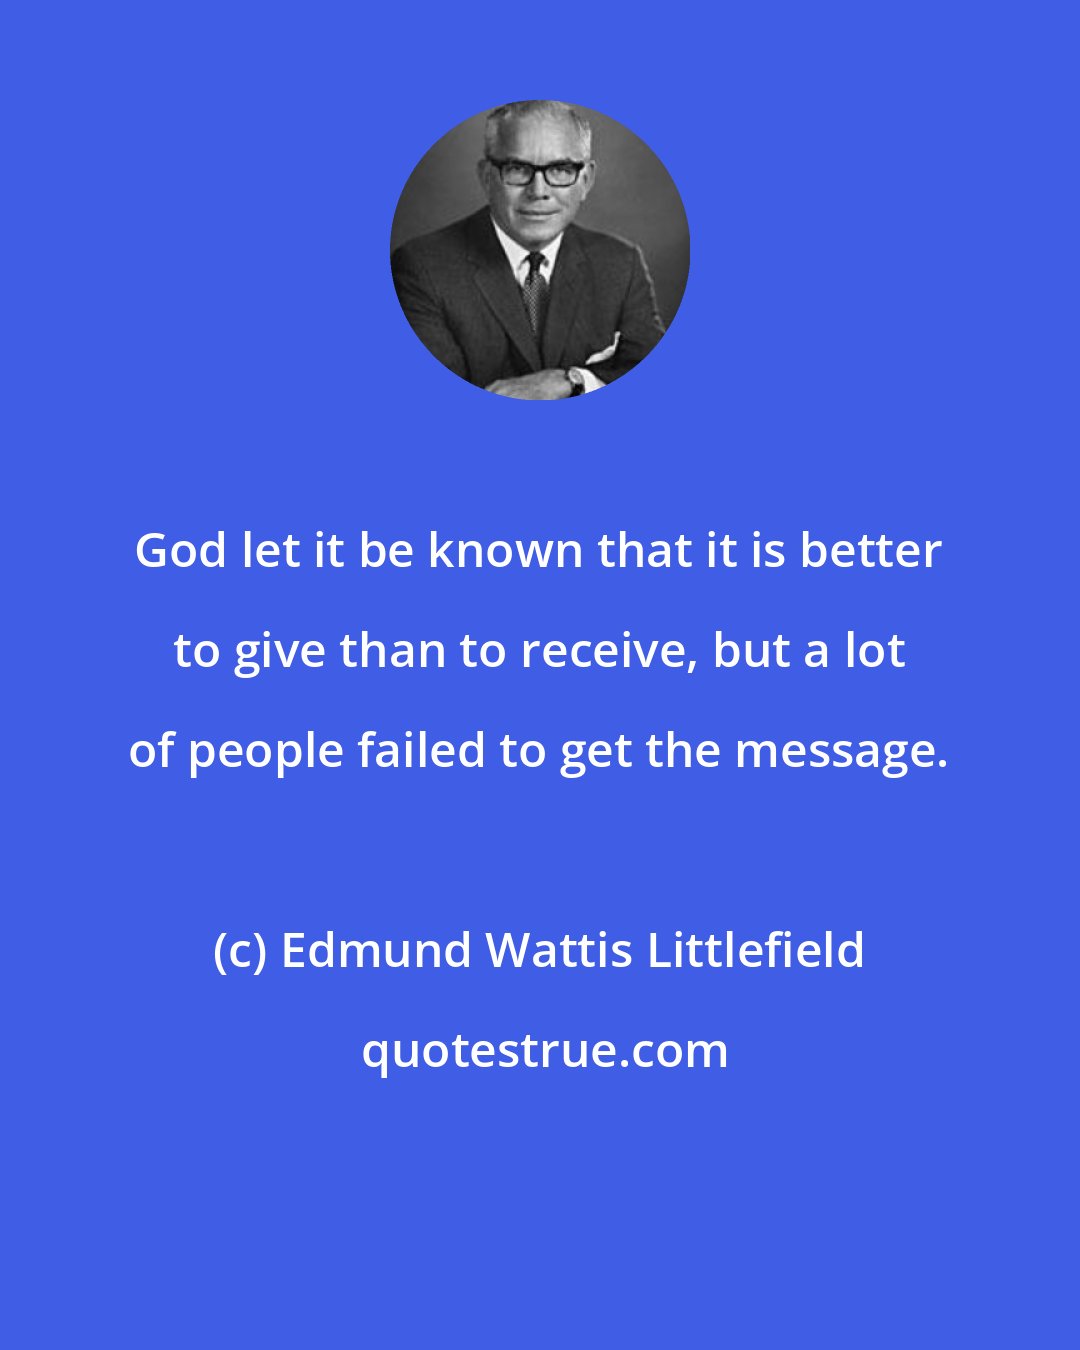 Edmund Wattis Littlefield: God let it be known that it is better to give than to receive, but a lot of people failed to get the message.